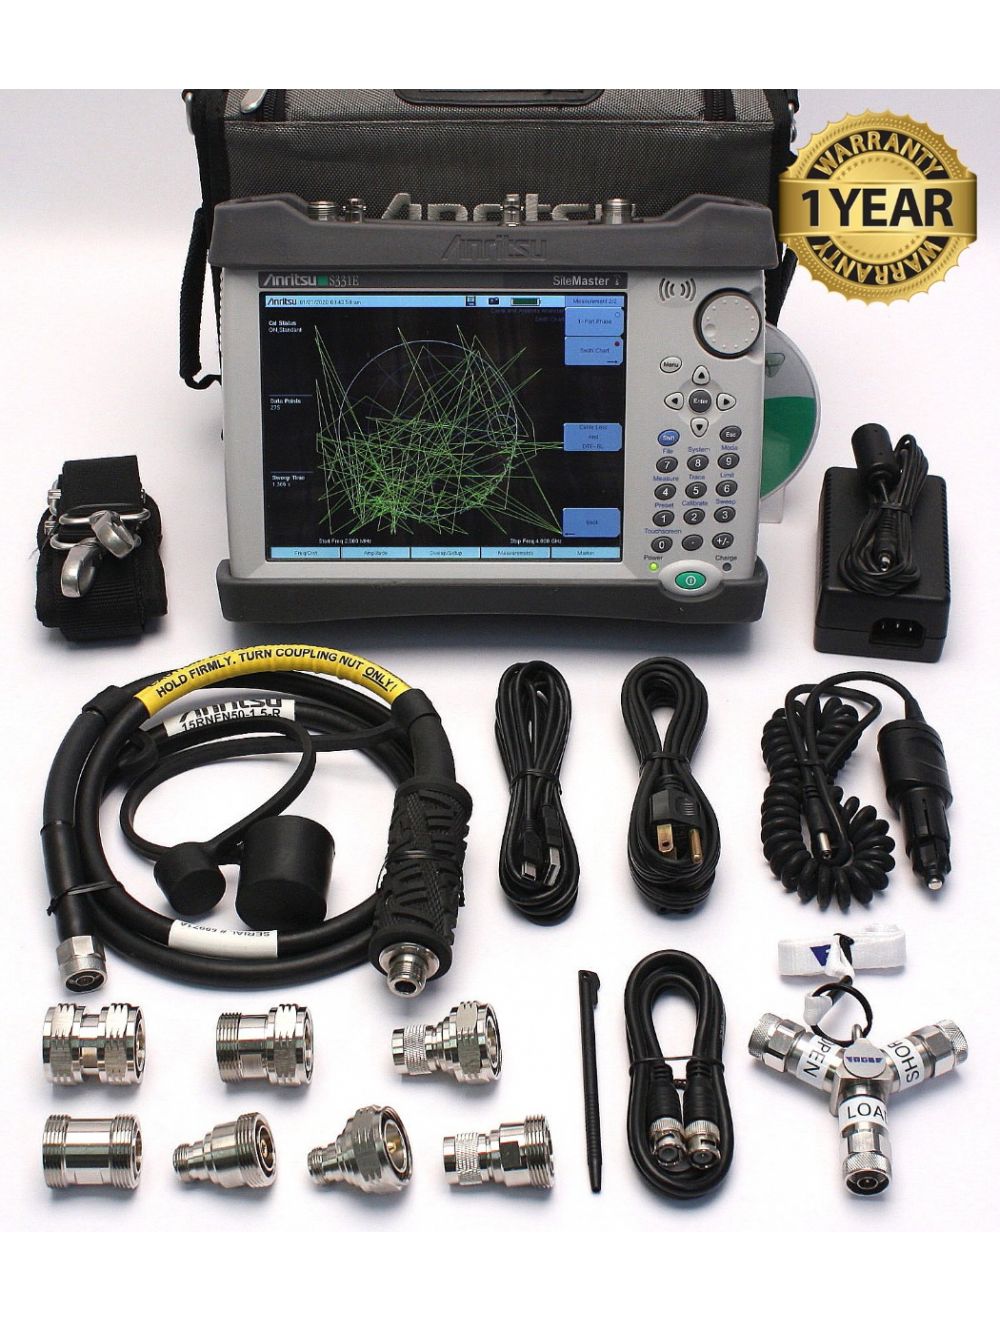 Anritsu Master S331E Cable & Antenna Analyzer Sitemaster for sale online 